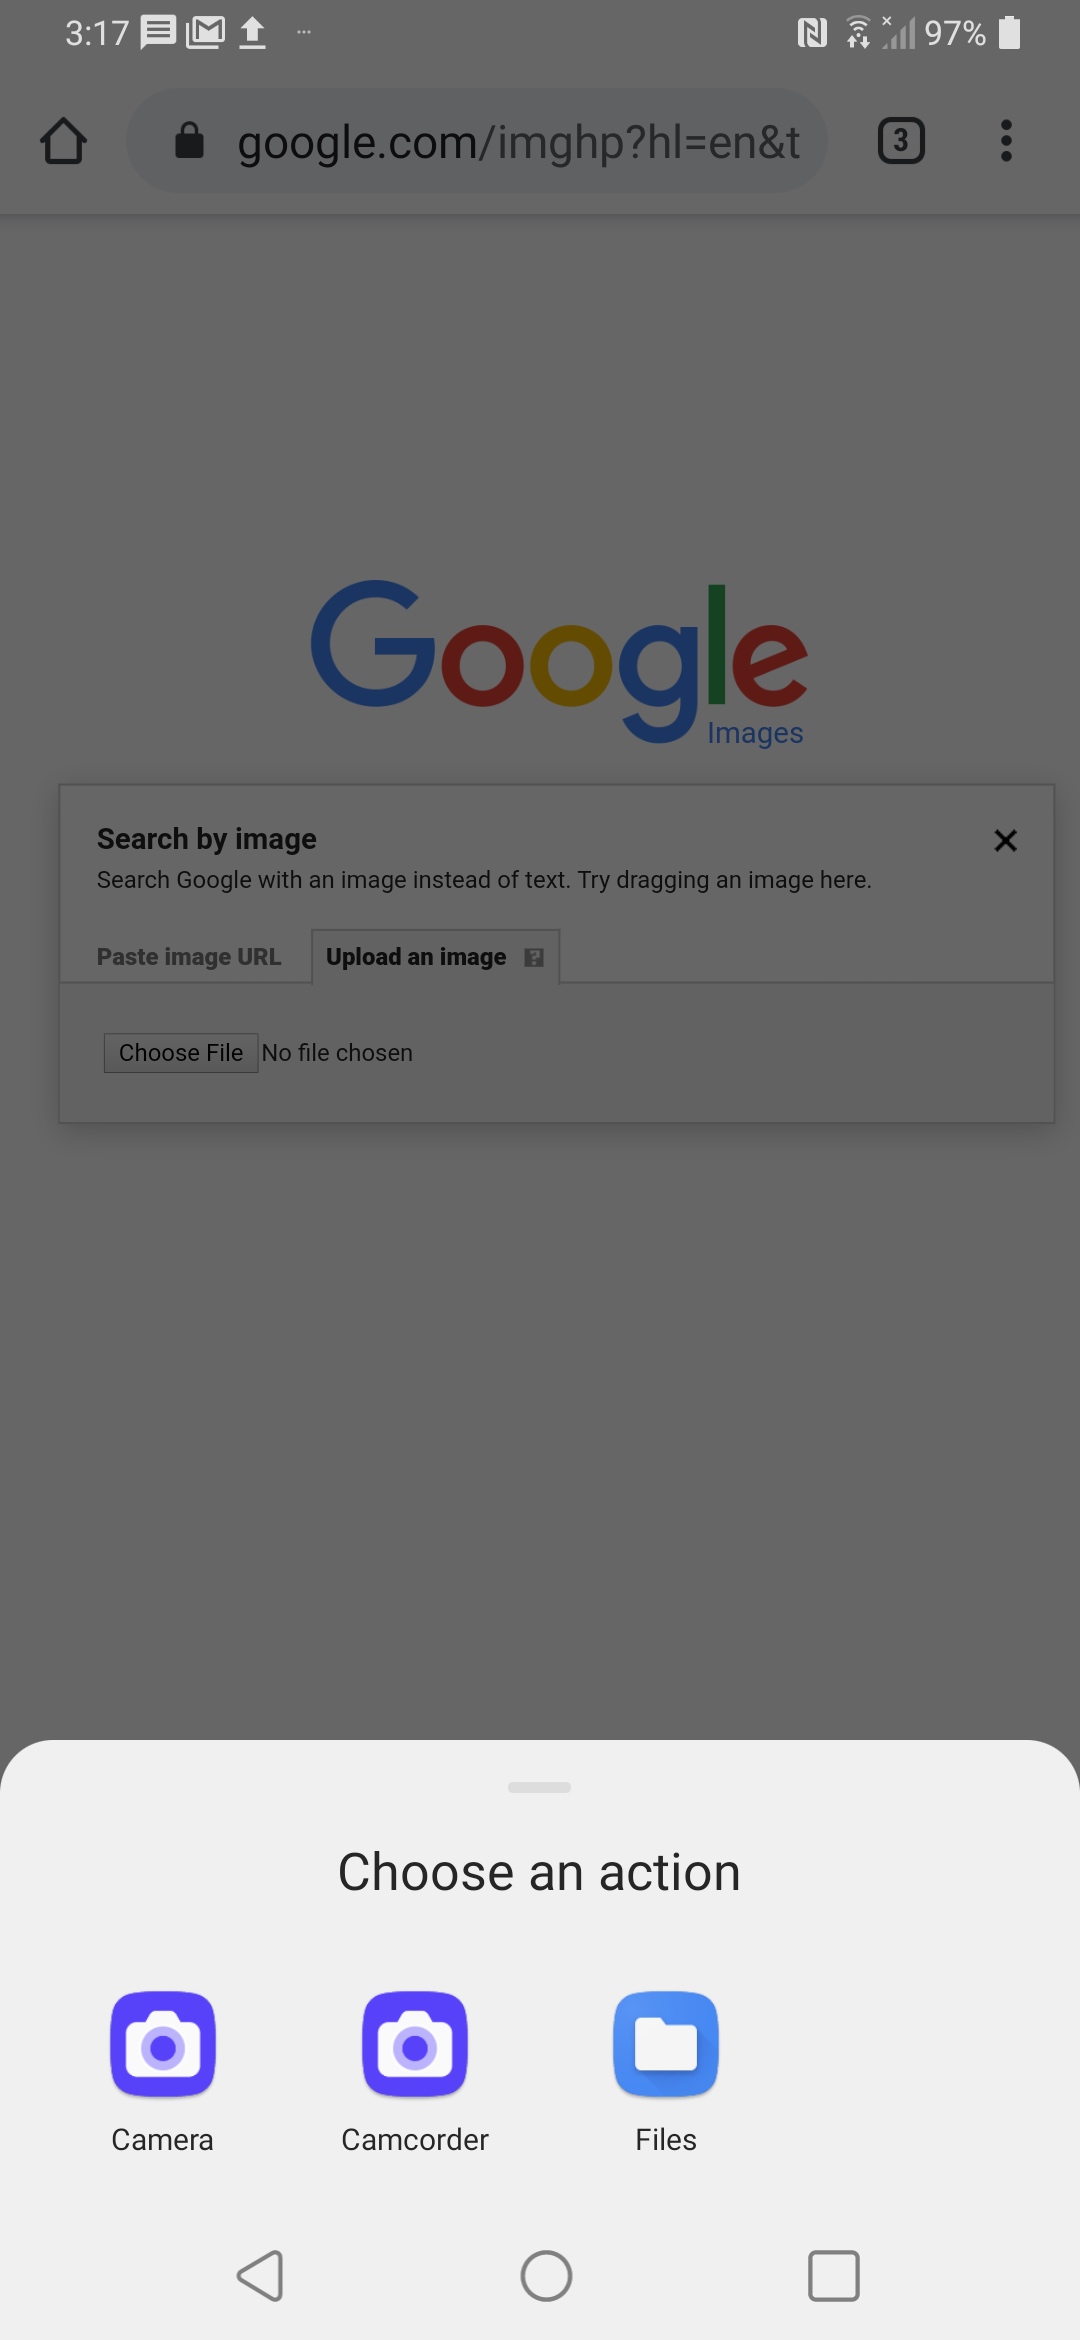 How To Perform A Reverse Image Search In Android Or Ios | Digital Trends